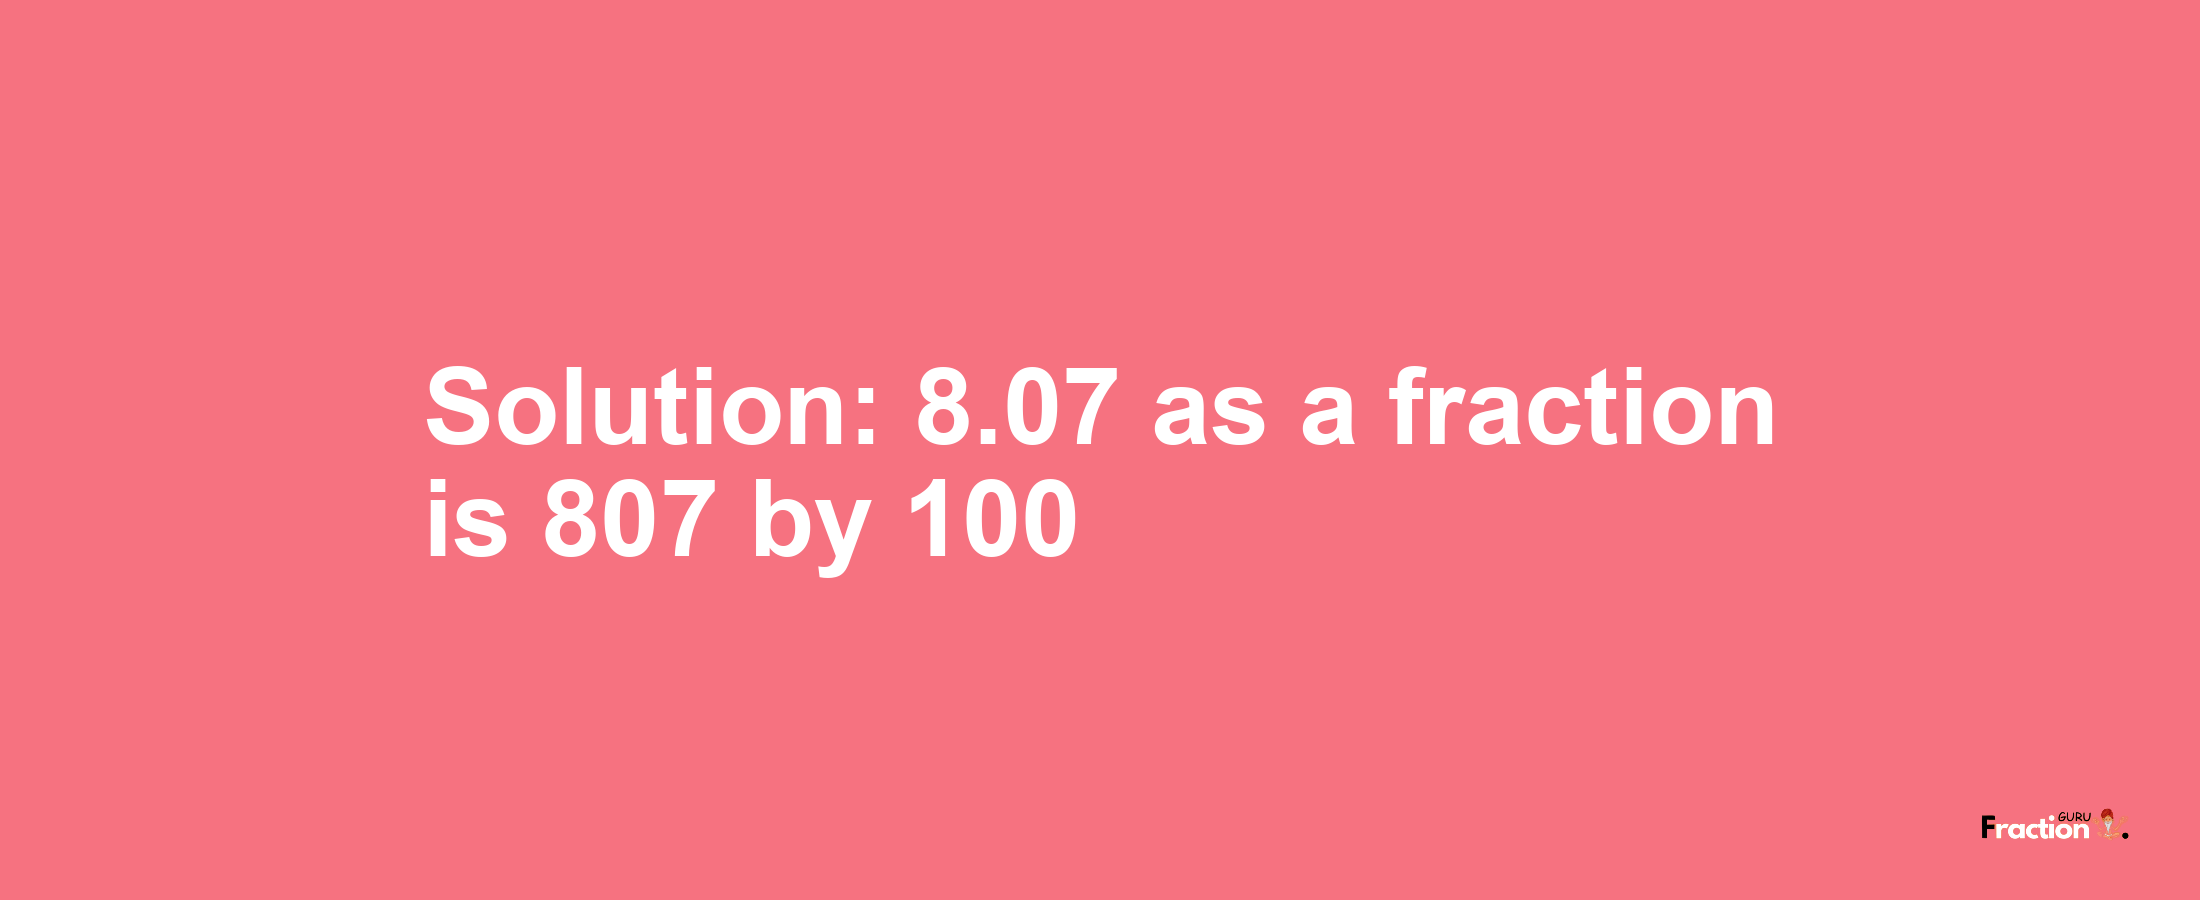 Solution:8.07 as a fraction is 807/100